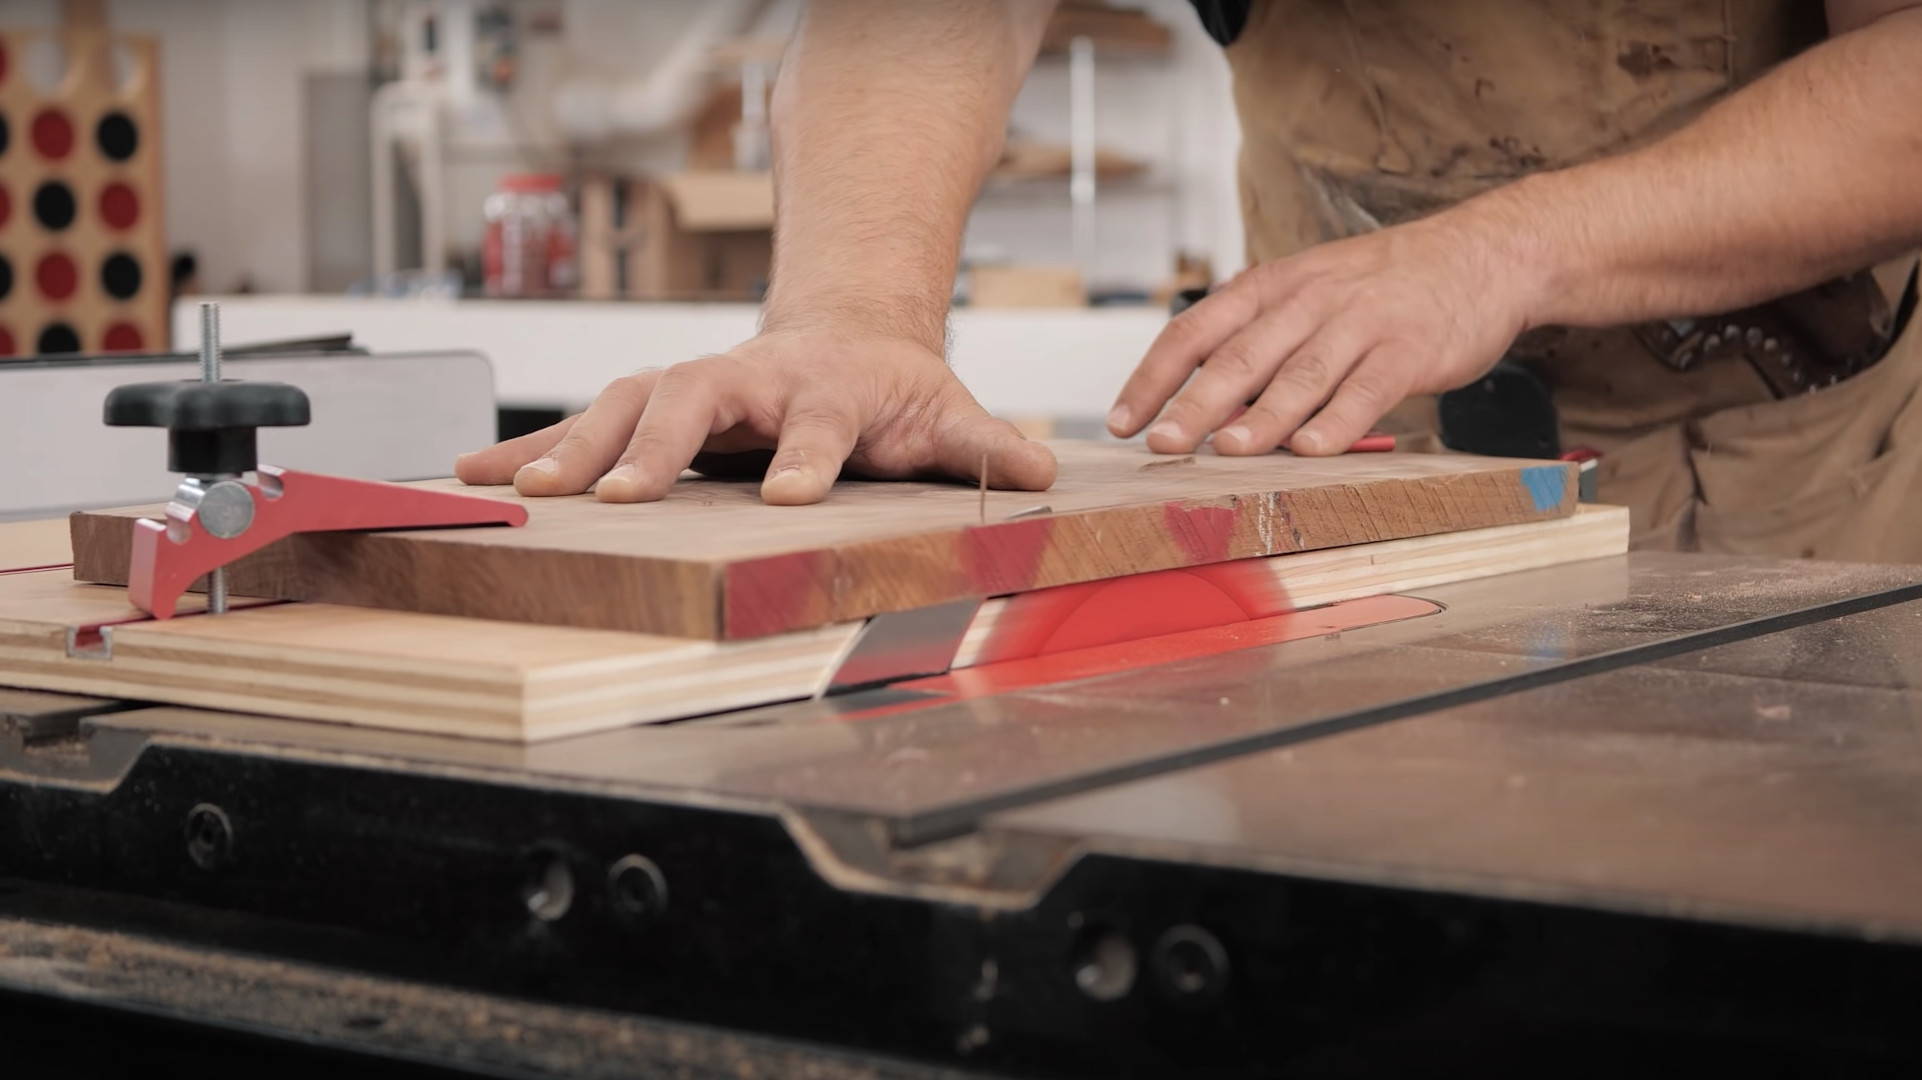 Edge jointing jig for table saw